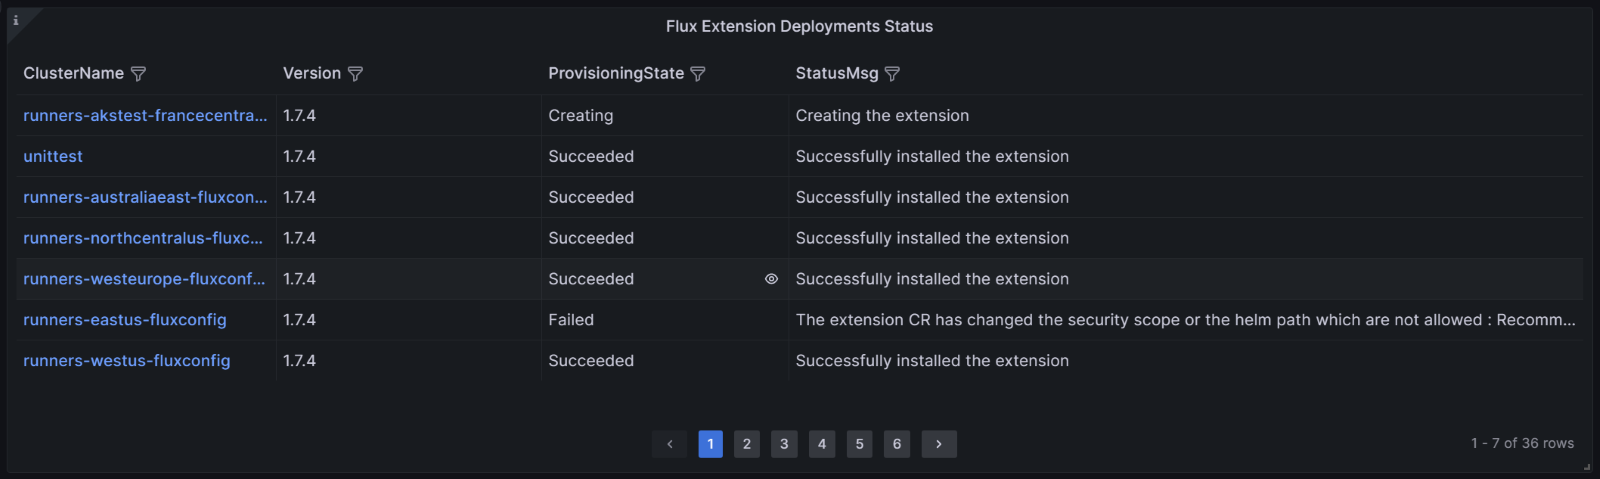 Screenshot showing the Flux Extension Deployments Status table in the Application Deployments dashboard.